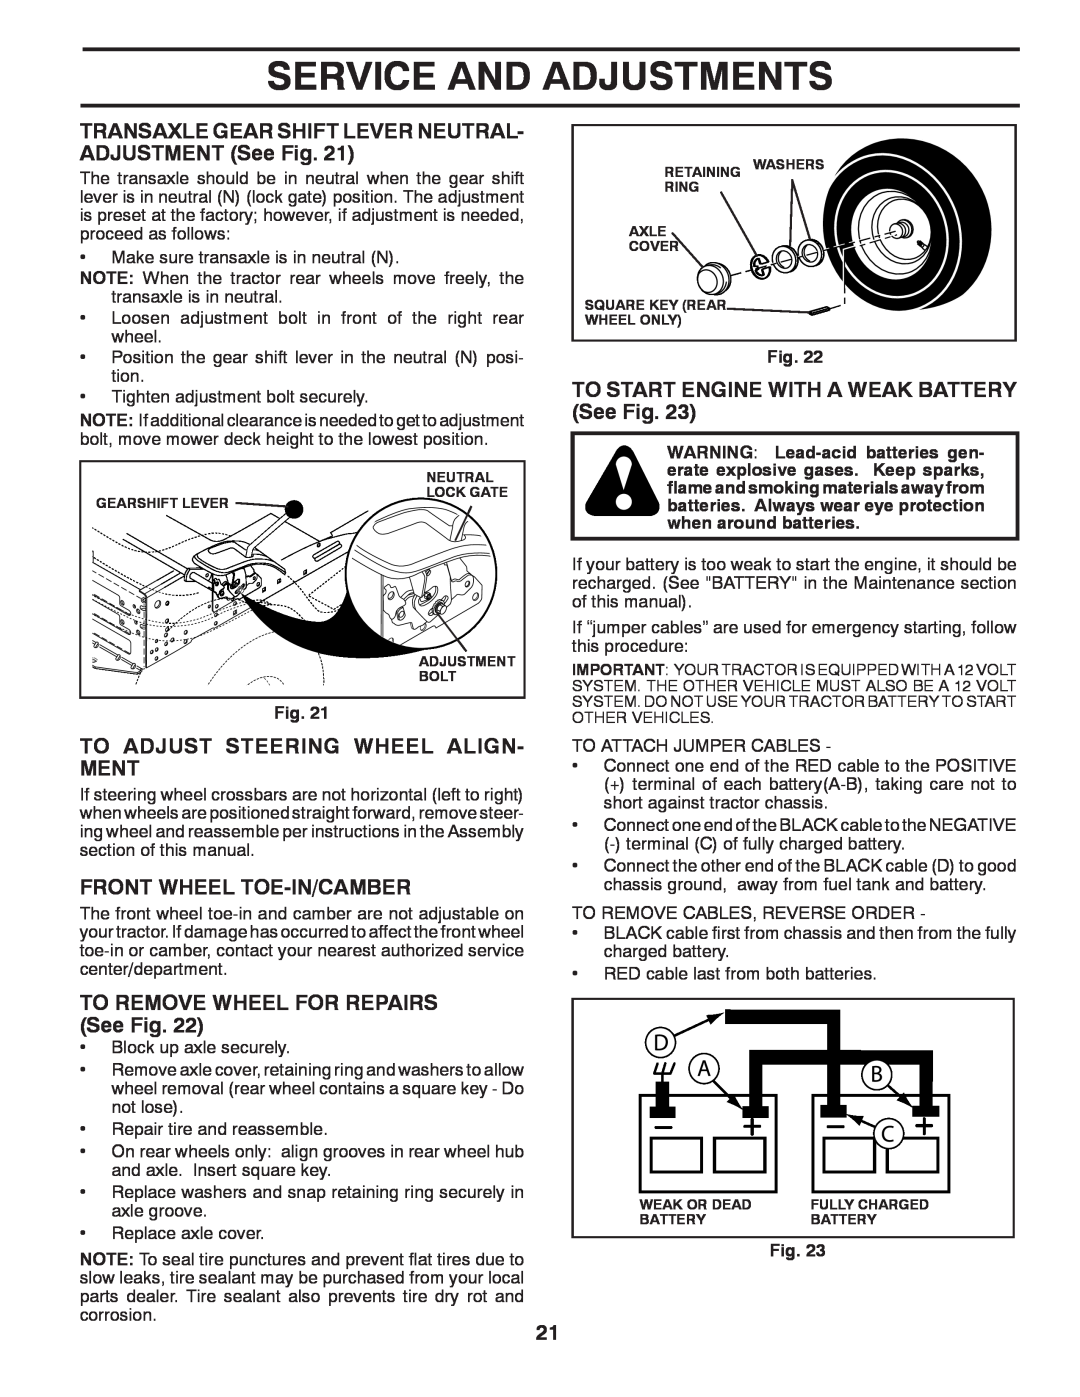 Poulan PO12538LT To Adjust Steering Wheel Align- Ment, Front Wheel Toe-In/Camber, TO REMOVE WHEEL FOR REPAIRS See Fig 